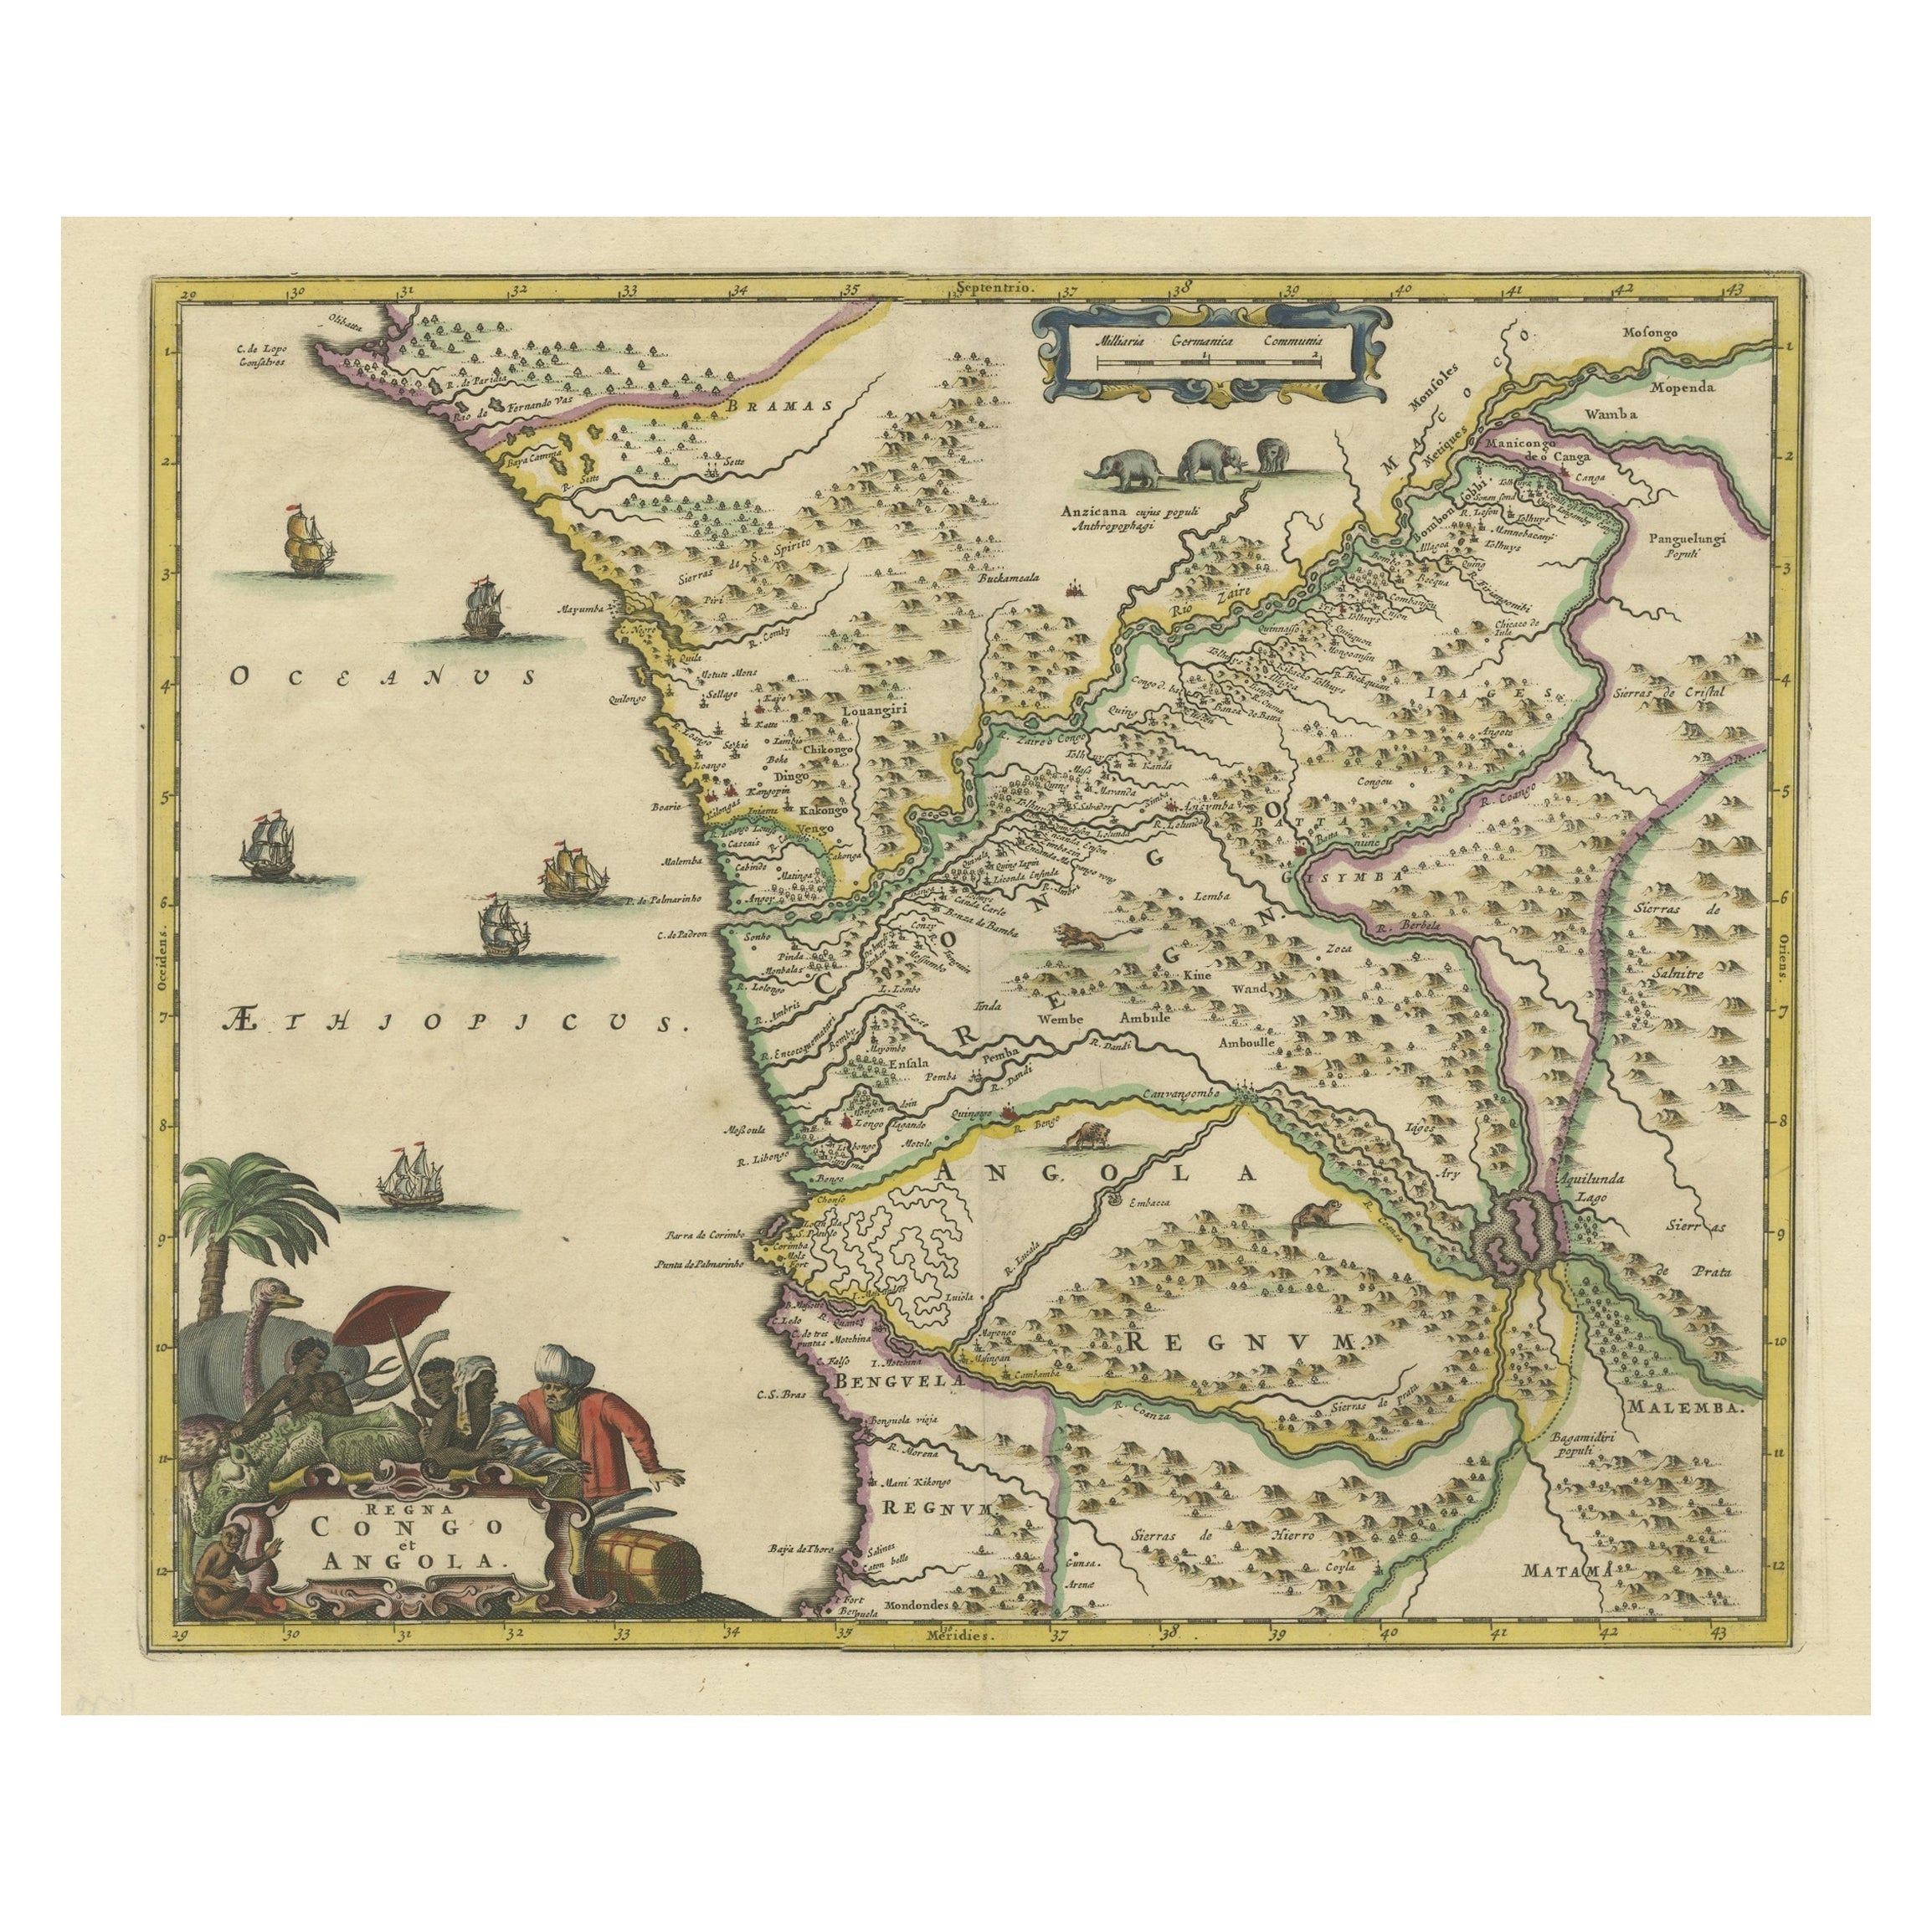 Antique Map of West Africa, focused on the Congo and Angola